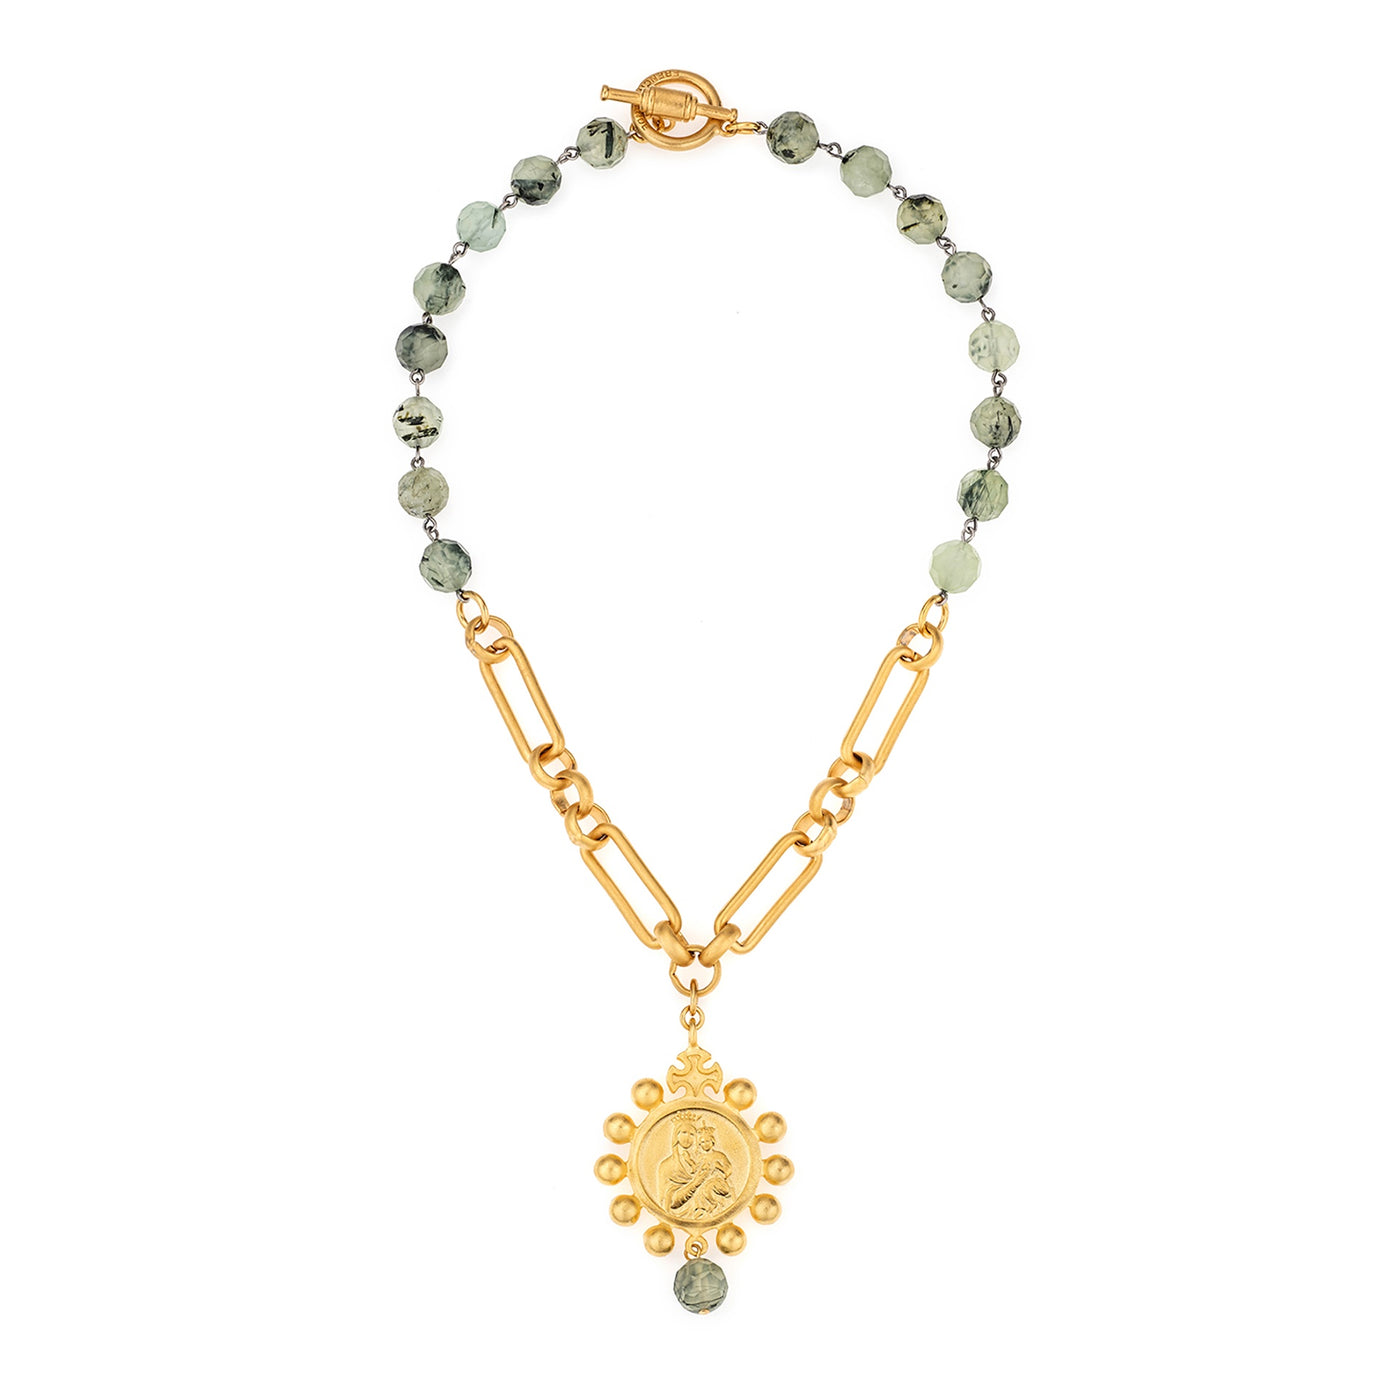 18" 24k Gold Plated Chain & Prehnite Necklace with Gold Medallion